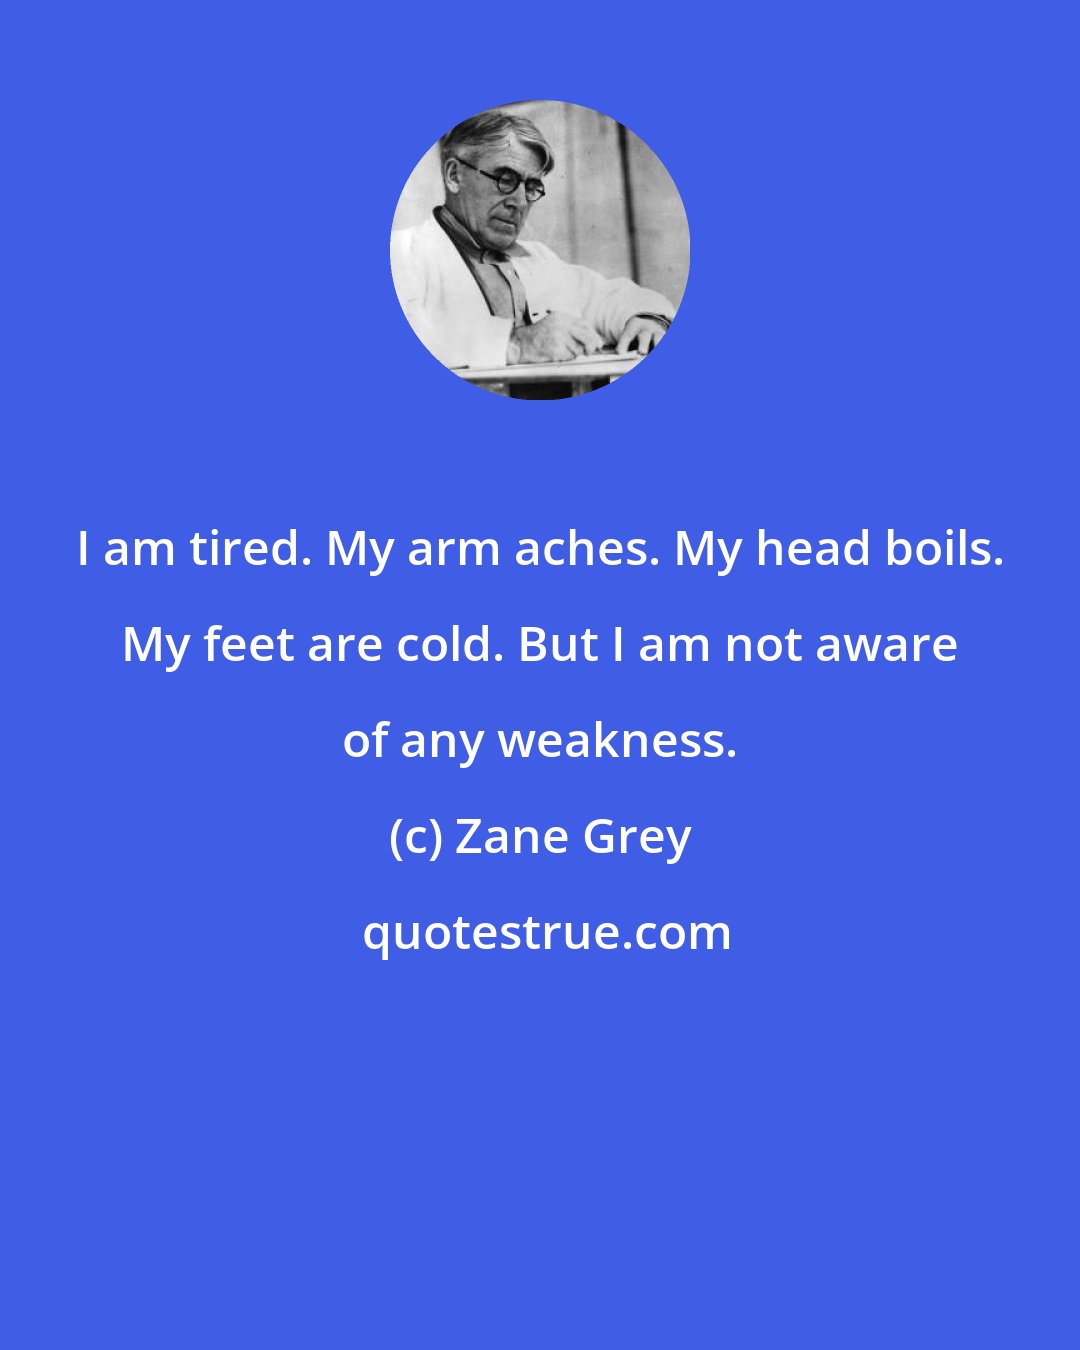 Zane Grey: I am tired. My arm aches. My head boils. My feet are cold. But I am not aware of any weakness.